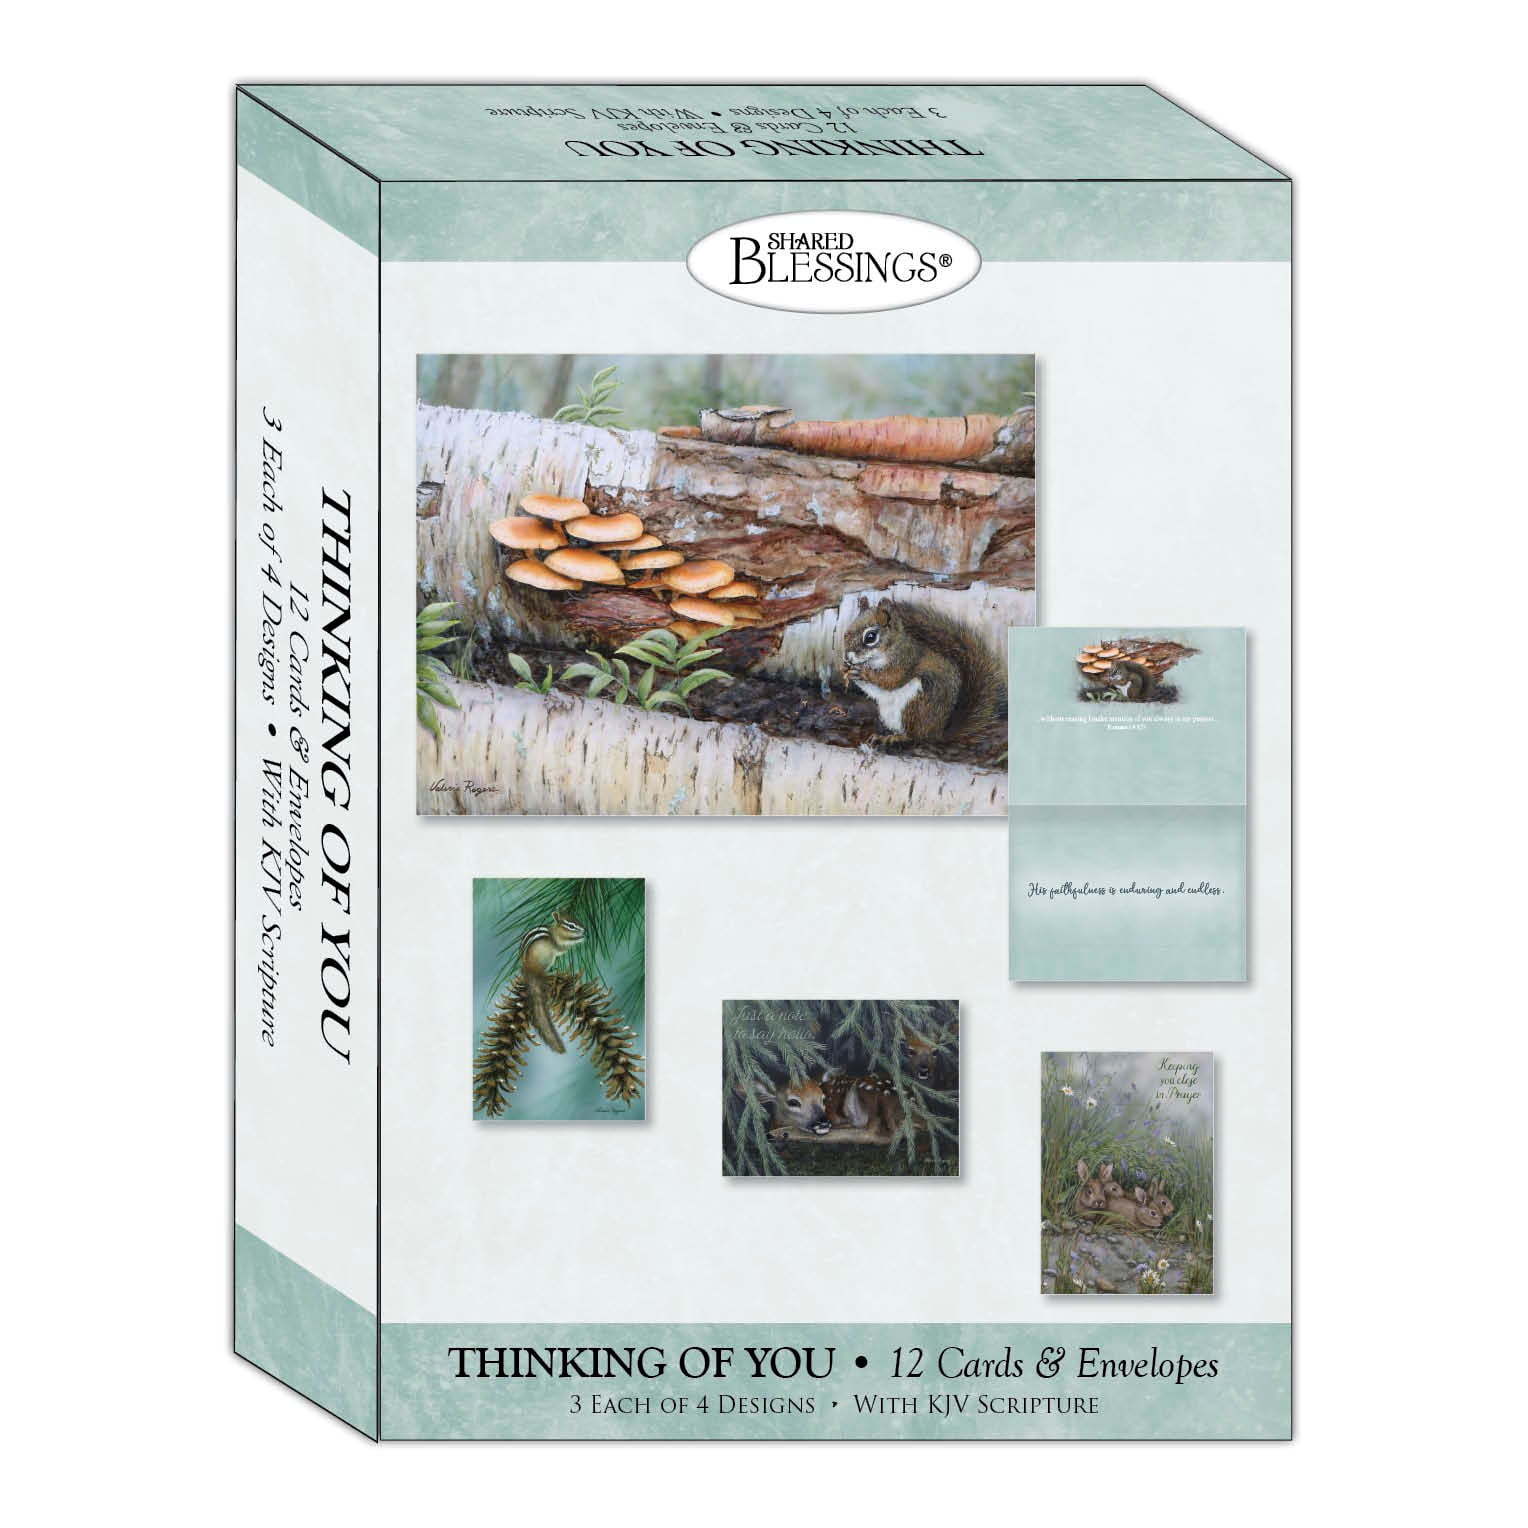 Picture of Crown Point Graphics 299536 Shared Blessings-Thinking of You-Woodlands Boxed Card - Pack of 12